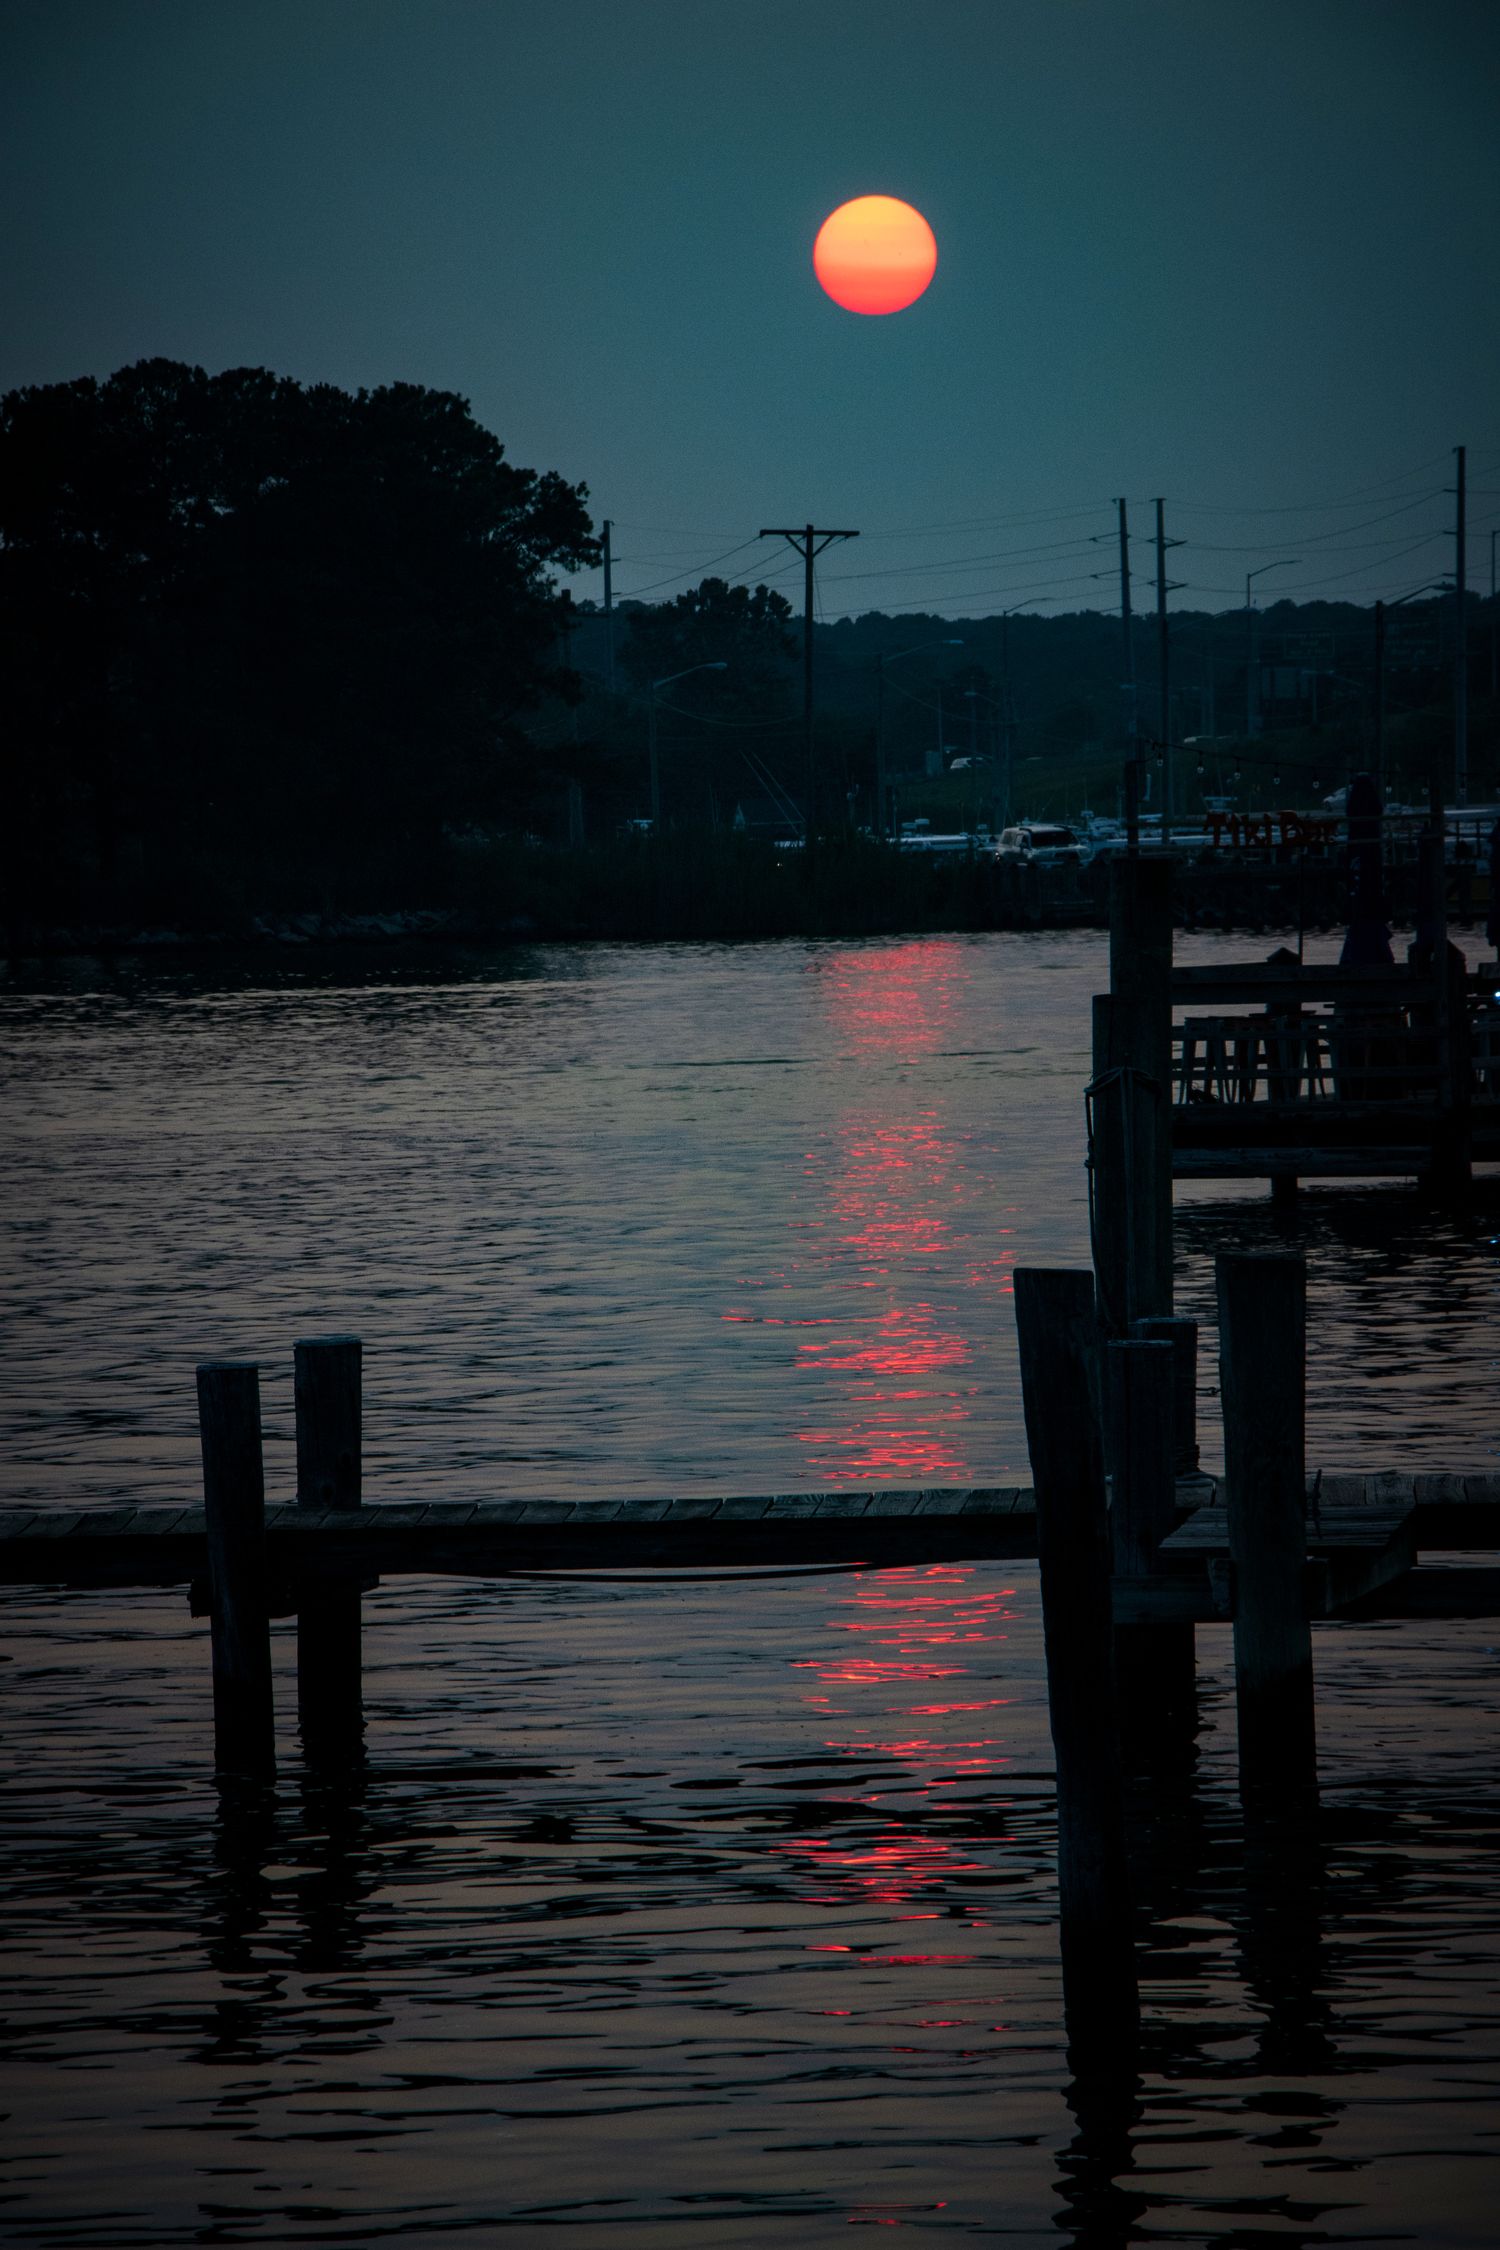 The sunset over the shimmering water from the docks at Hyatt Place Kent Narrows, MD 